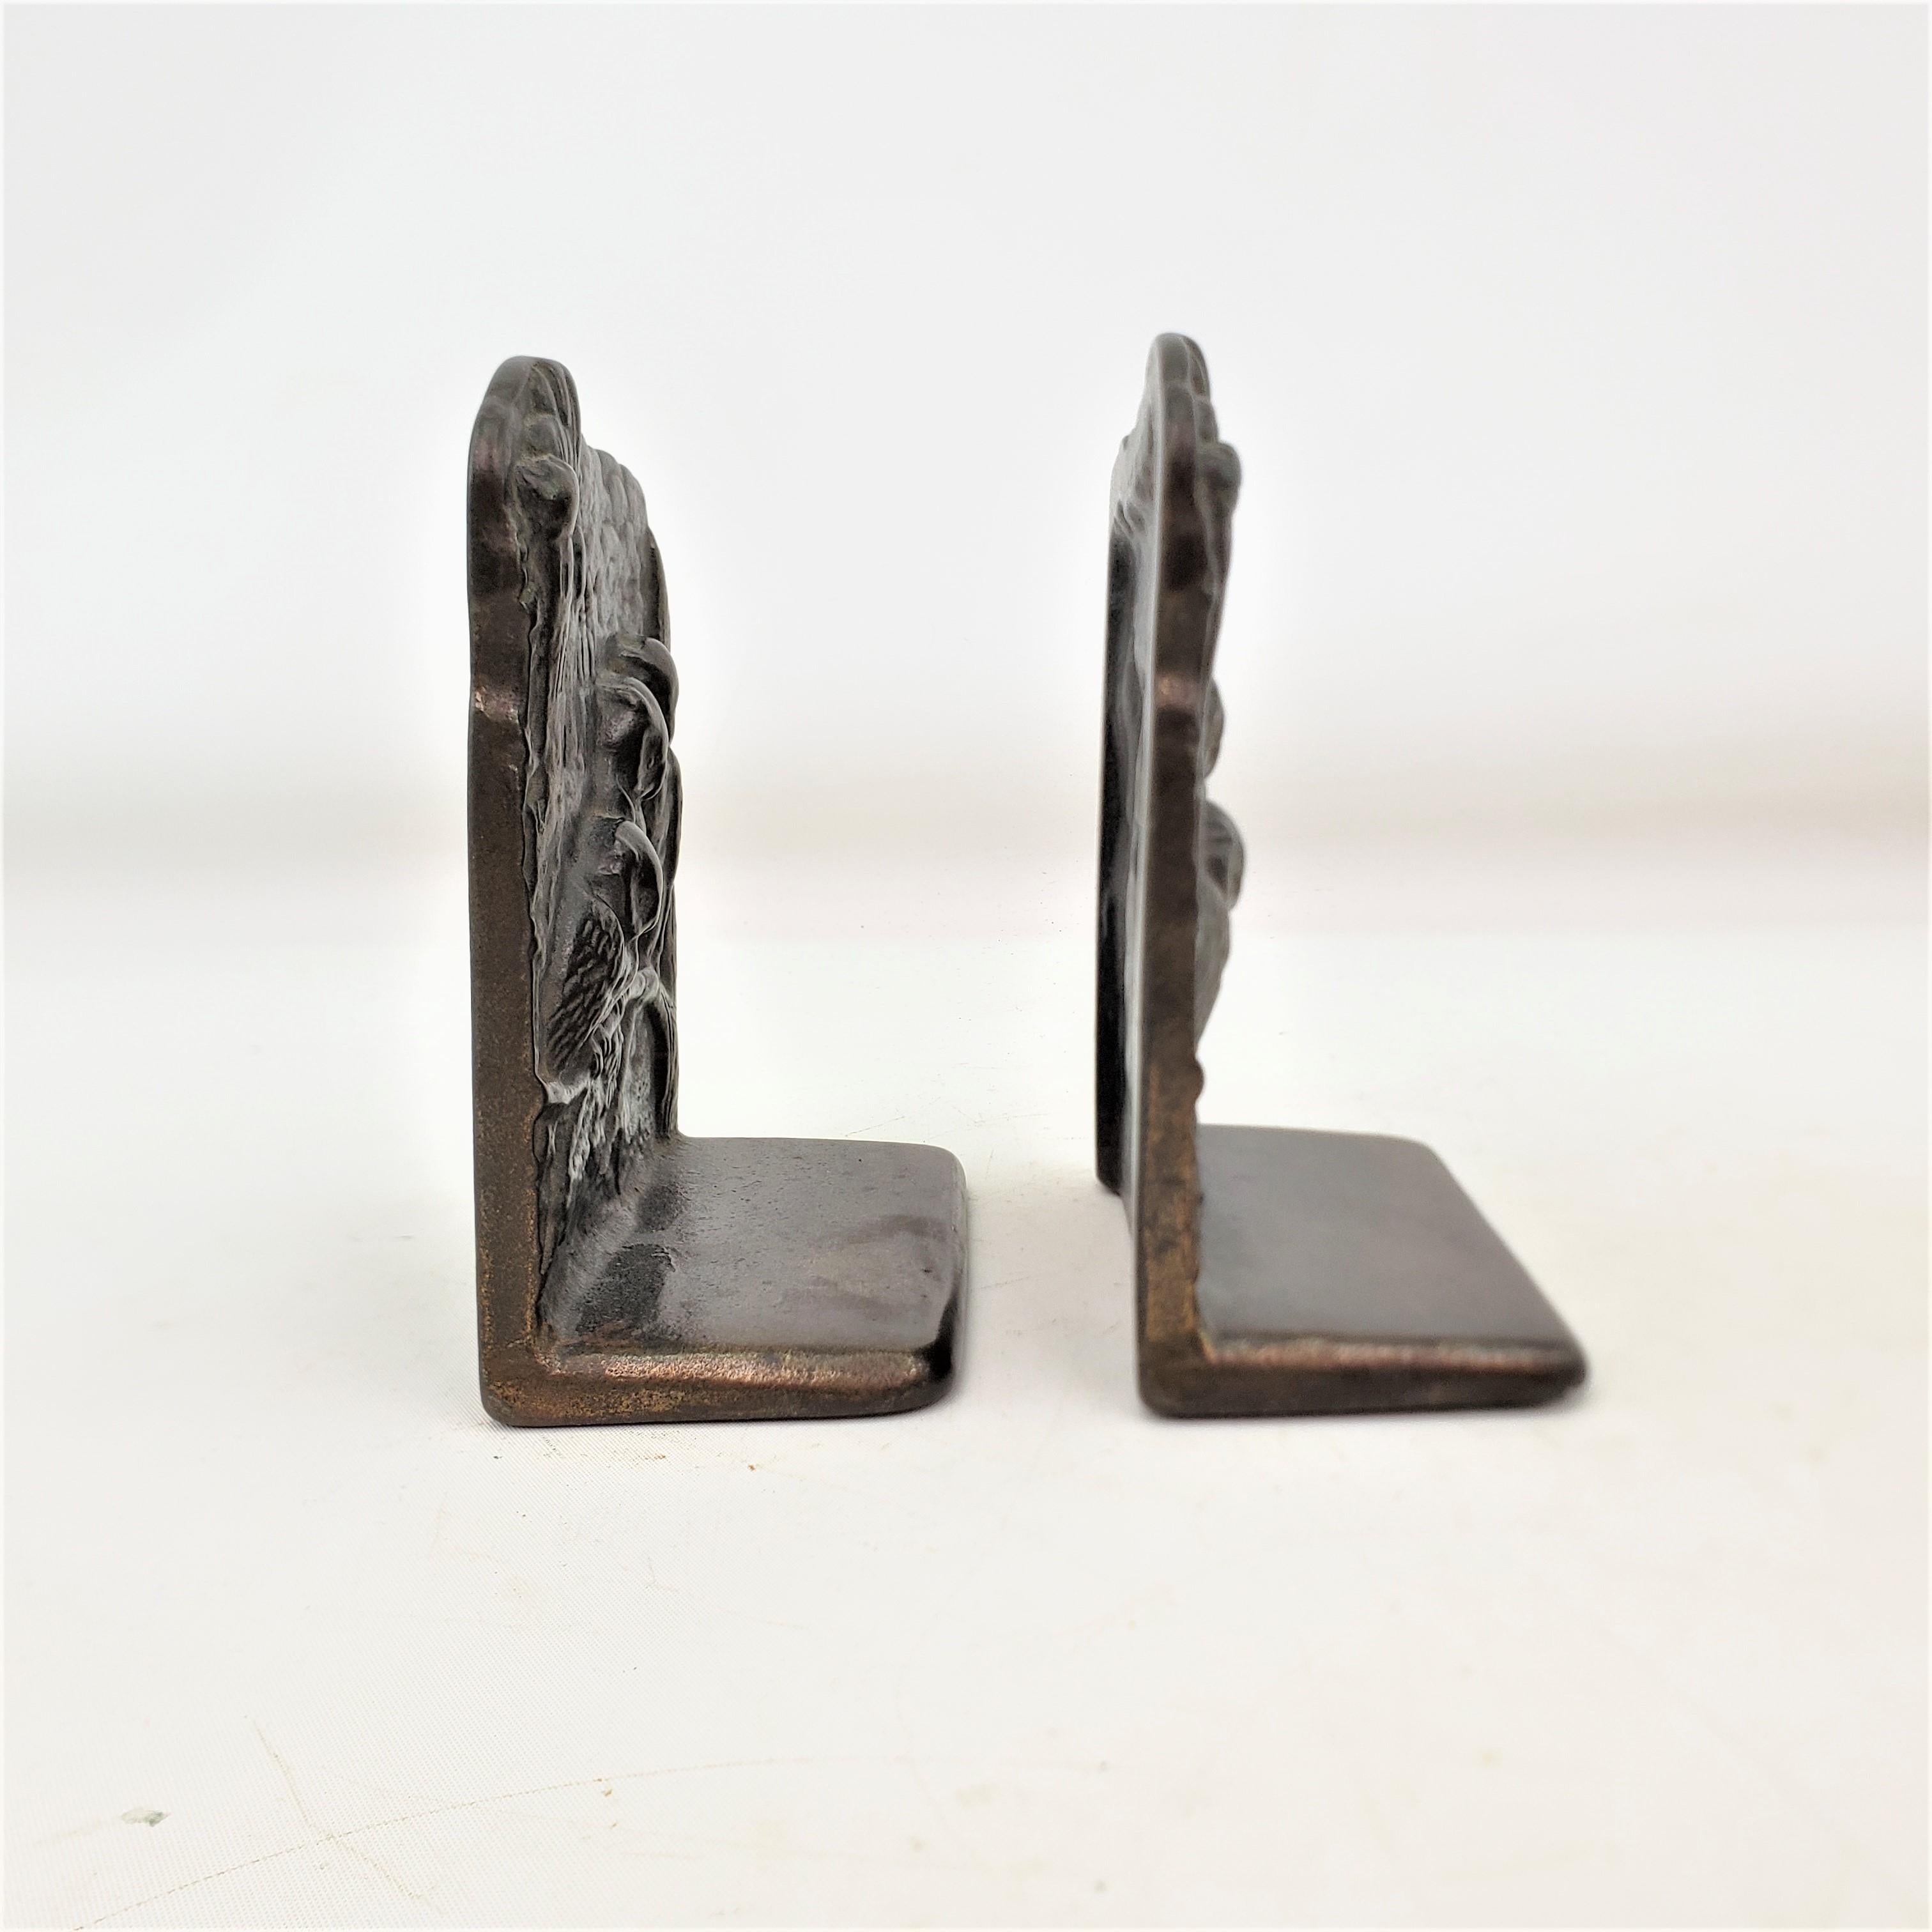 Steel Antique Art Deco Cast & Patinated Bookends Depicting Three Perched Owls For Sale